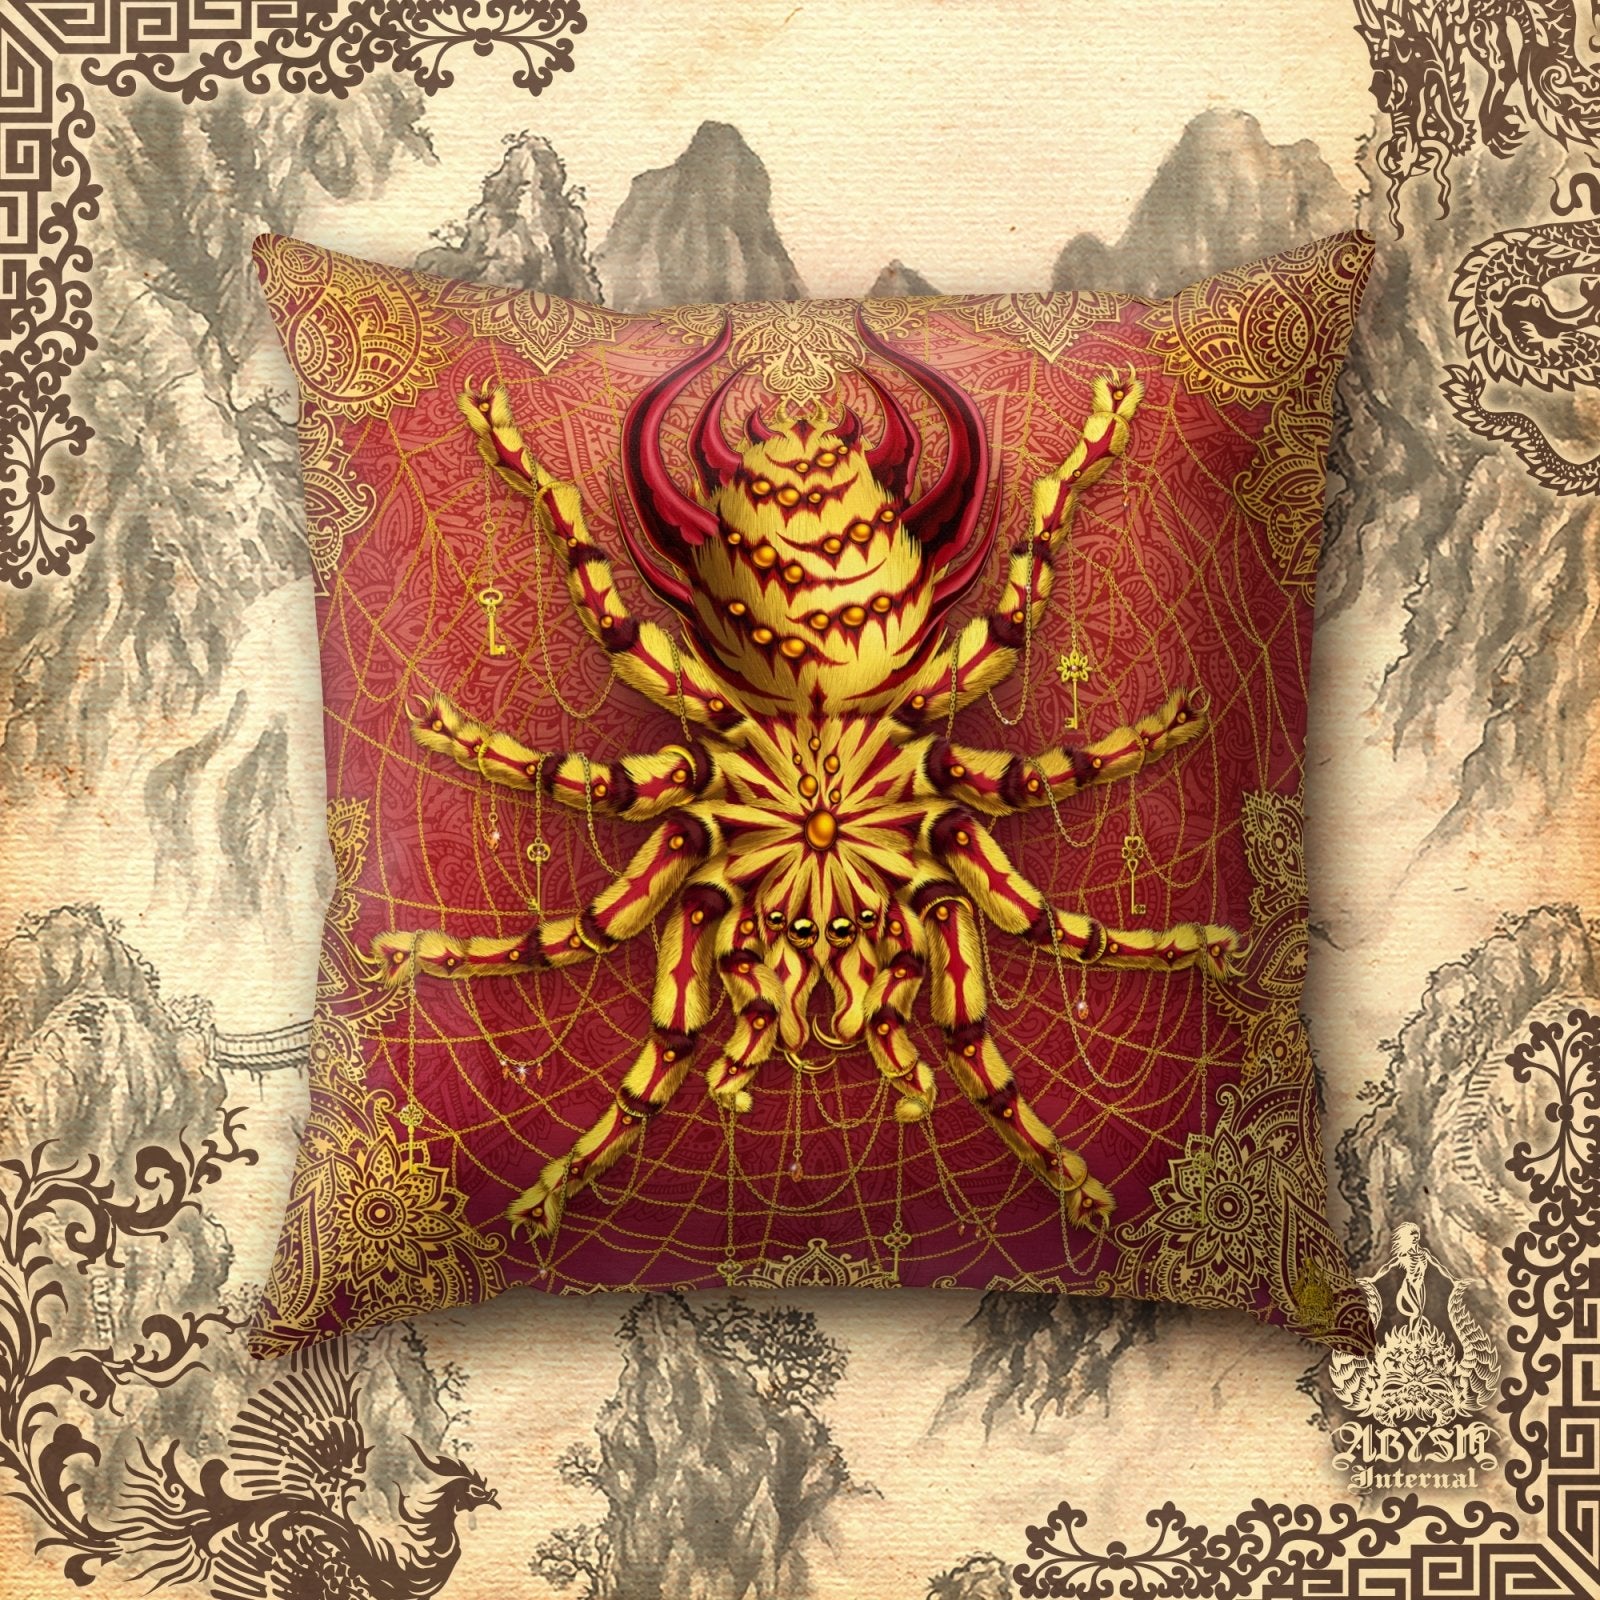 Boho Throw Pillow, Decorative Accent Cushion, Indie Room Decor, Funky and Eclectic Home - Tarantula, Spider - Abysm Internal